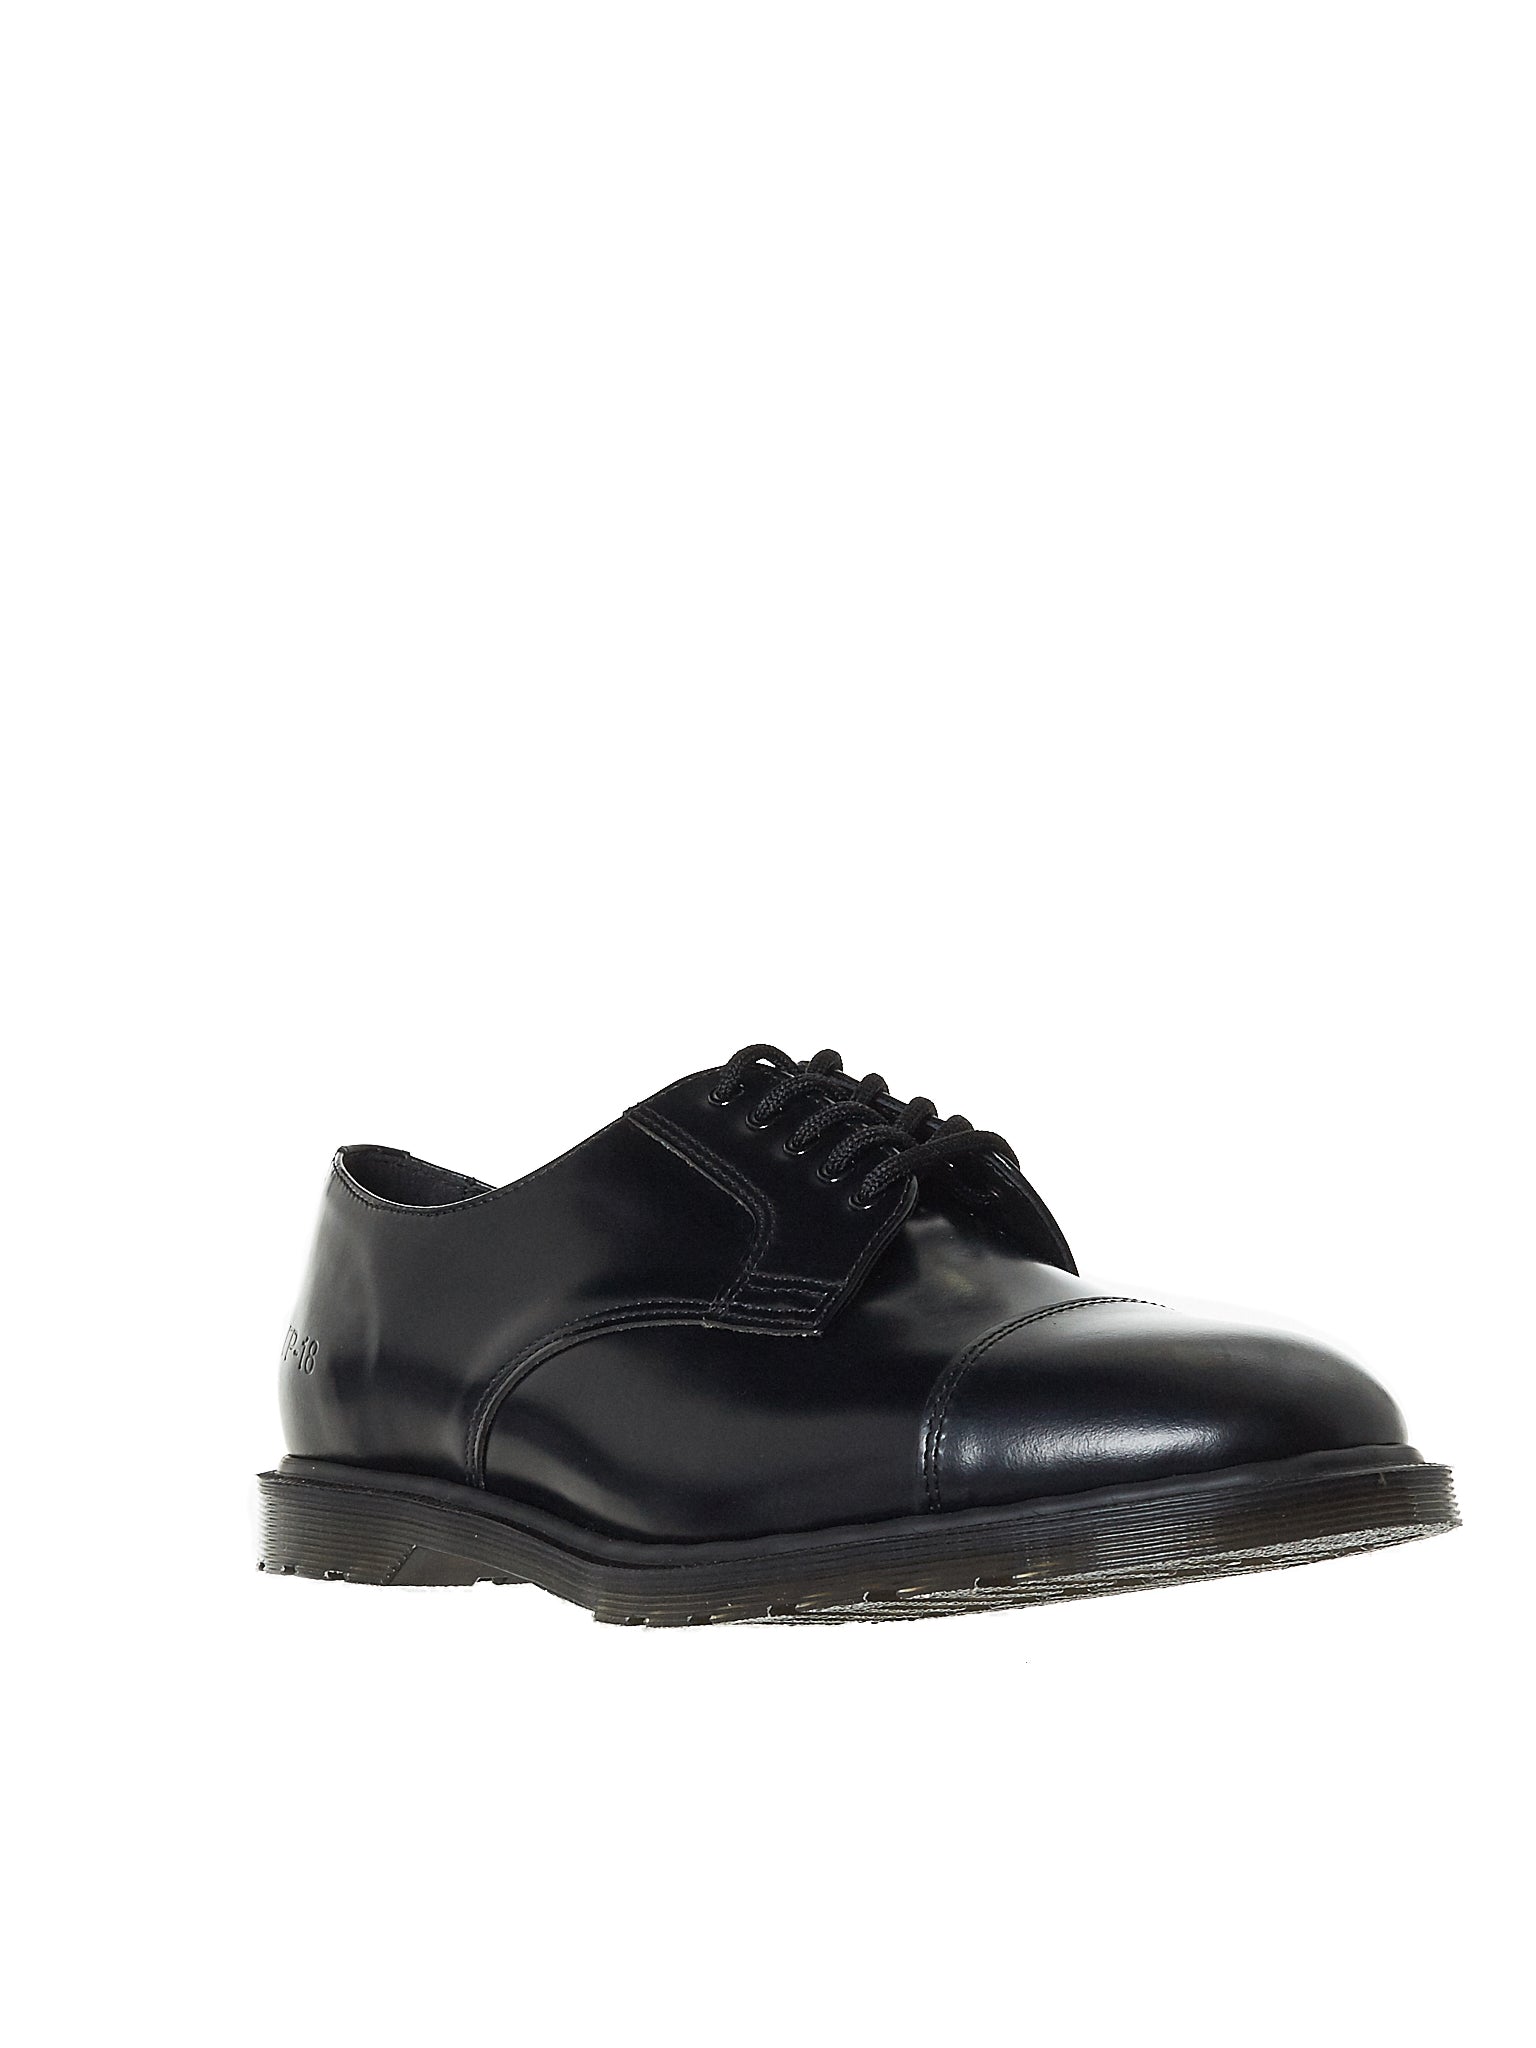 Dr. Martens MIE Leather Derby